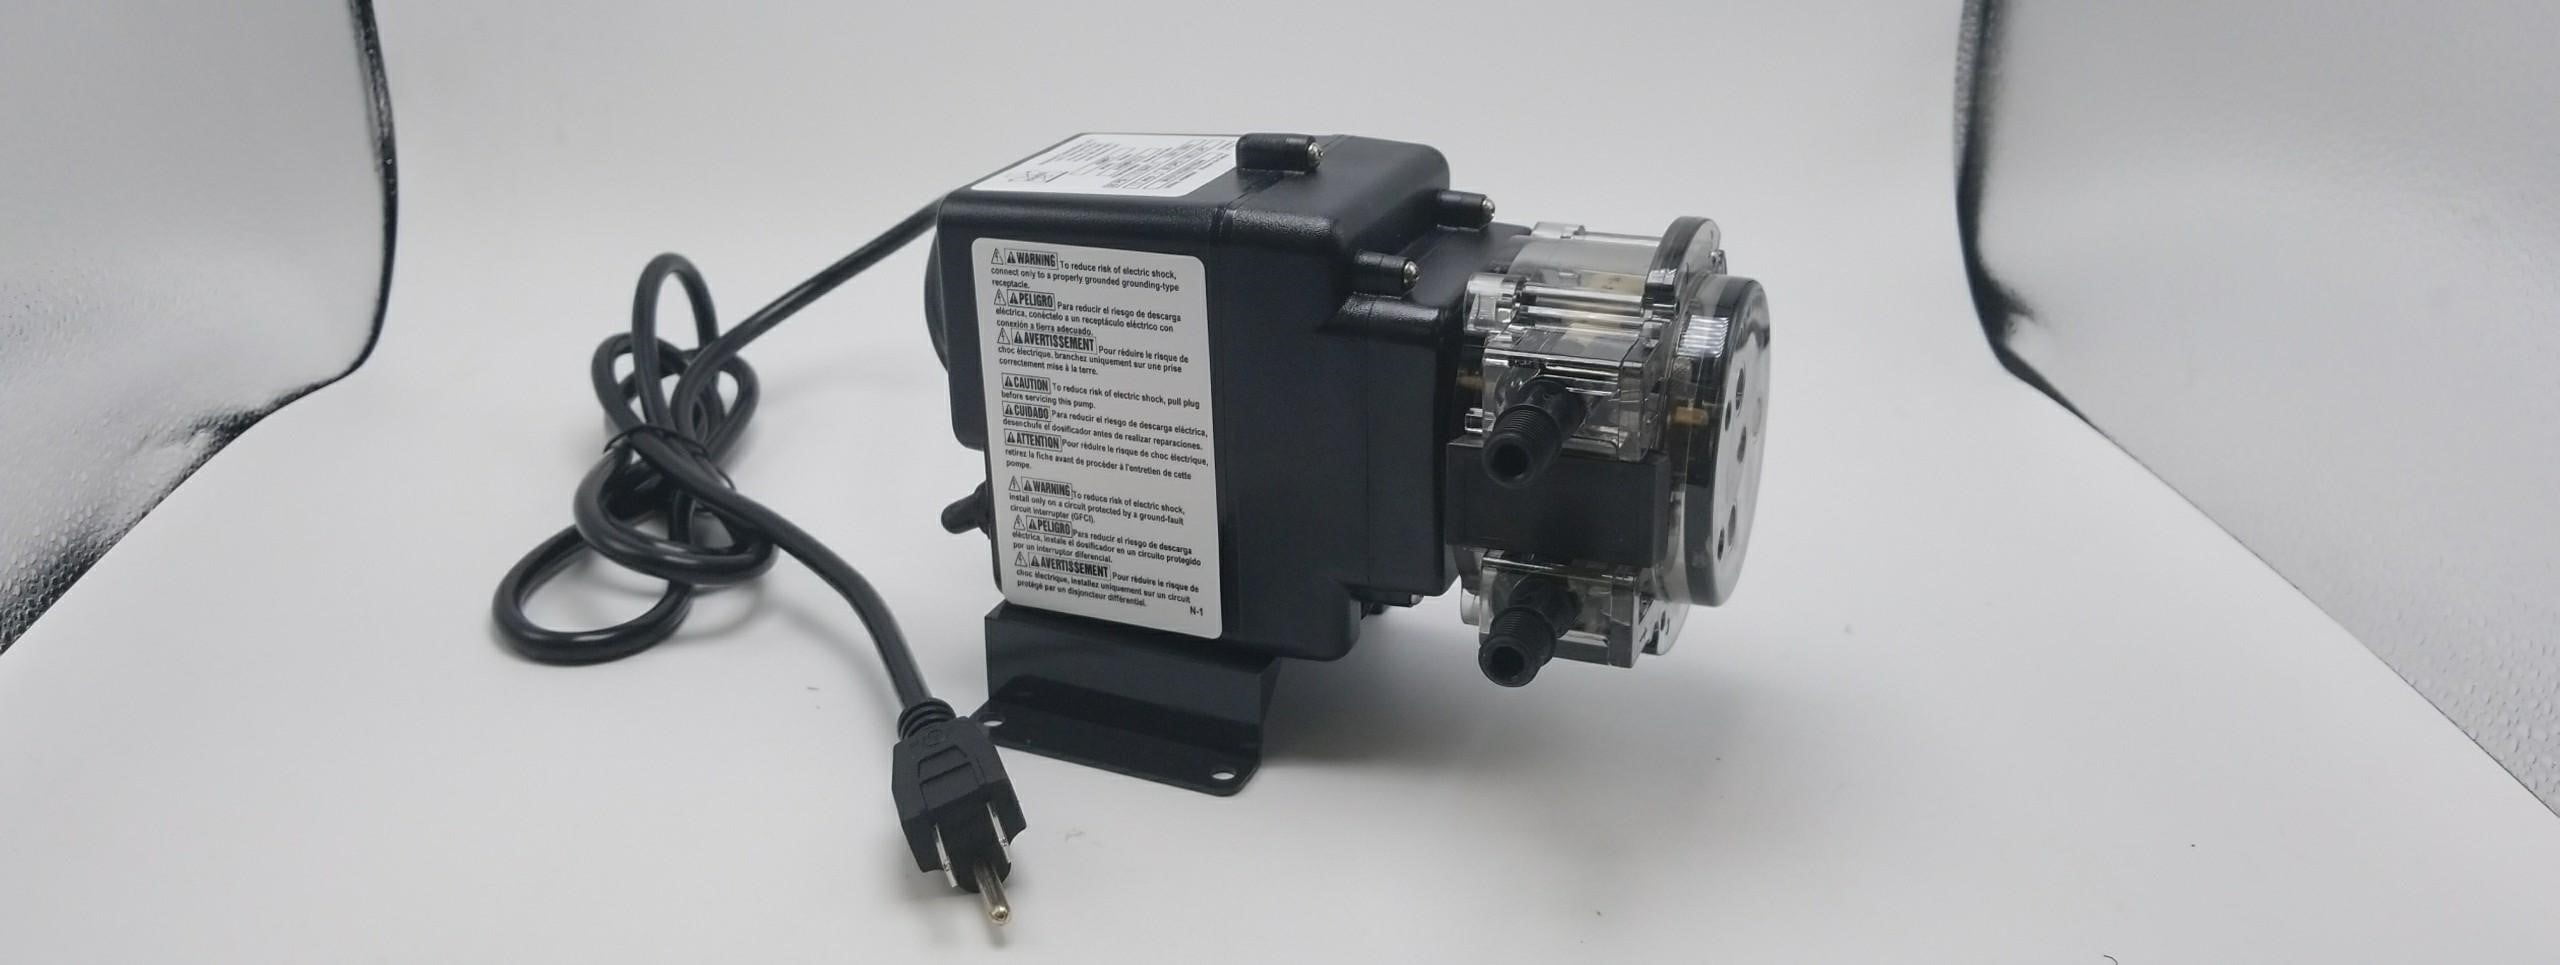 Stenner Peristaltic Pump Adjustable Head Rated at 1.1 to 22 GPD Adjustable Head Model Number 45MJL3A1S - Ideal Chlorine Injection Pump 120 Volts Rated at 25 psi Stenner Pump 45m3 